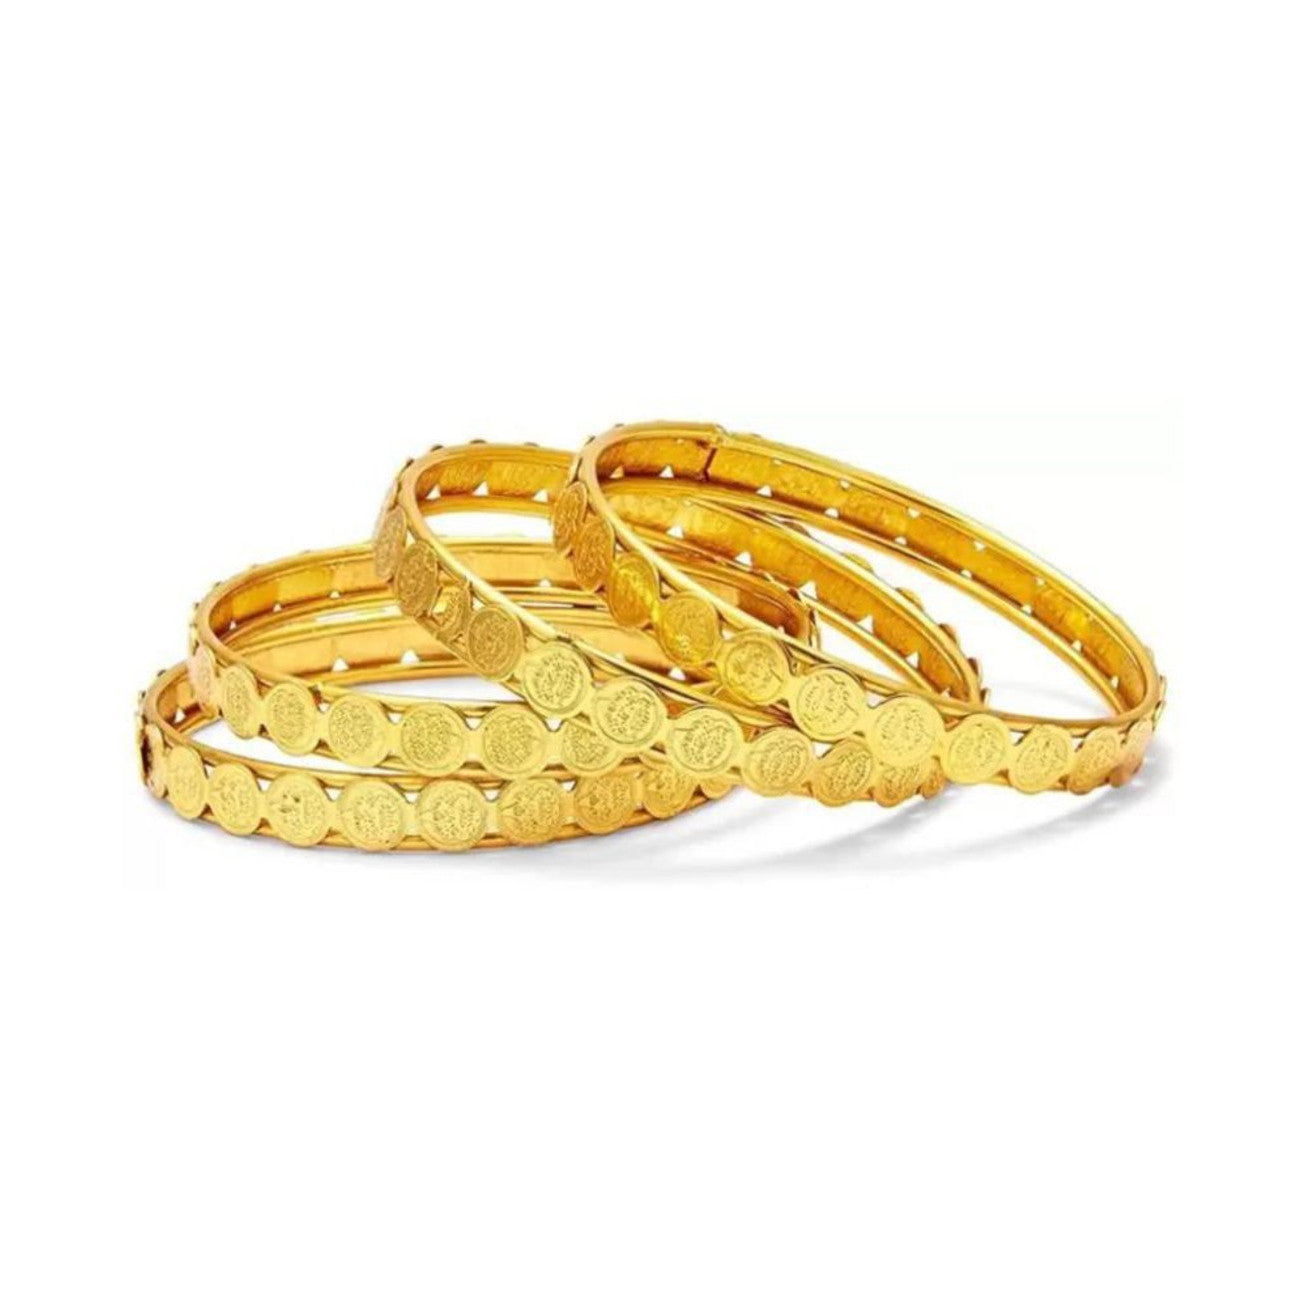 Best Gold Plated Traditional Handcrafted Designed by Mekkna of Necklace with Bangles for Women. Now We can Book This Jewellery set online from Mekkna.